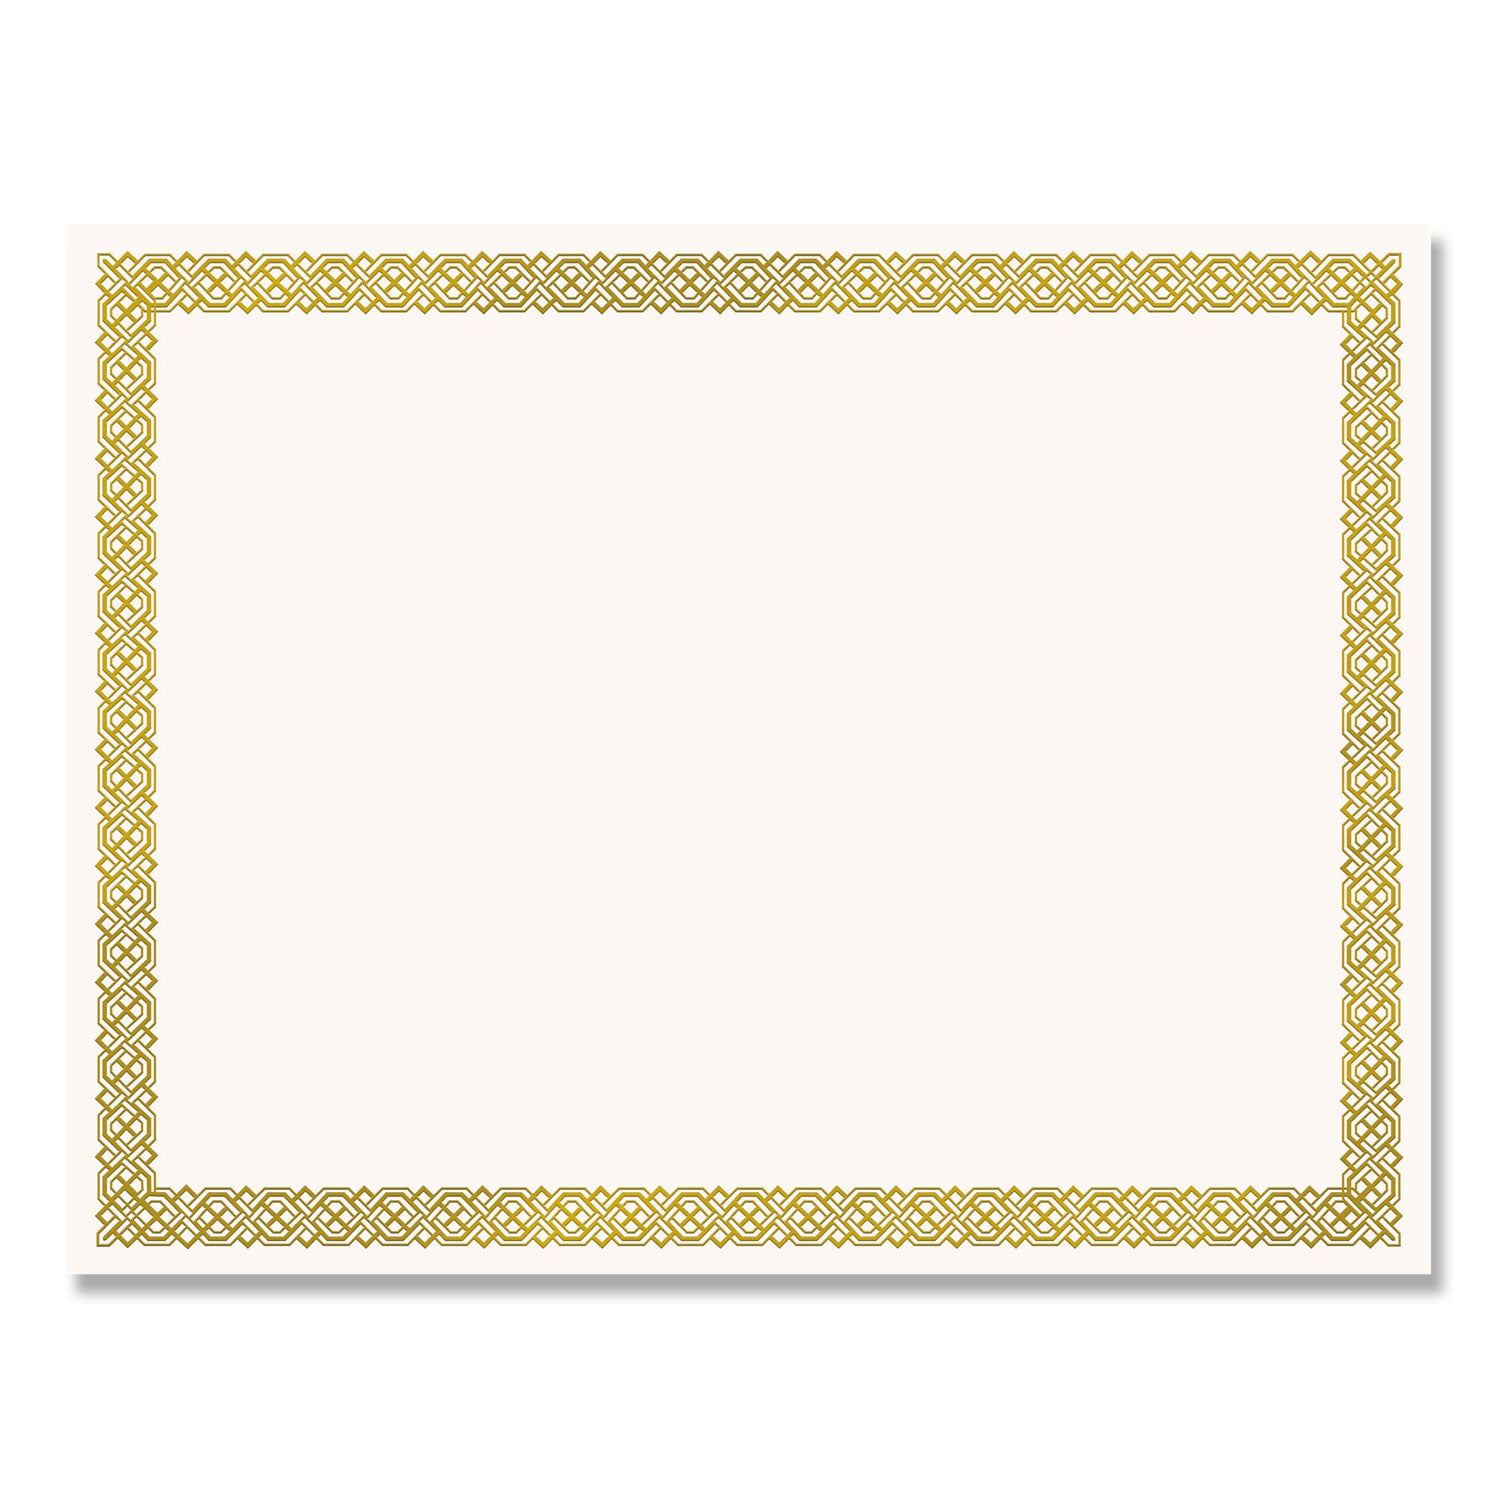 foil-border-certificates-85-x-11-ivory-gold-with-braided-gold-border-12-pack_cos936060 - 1